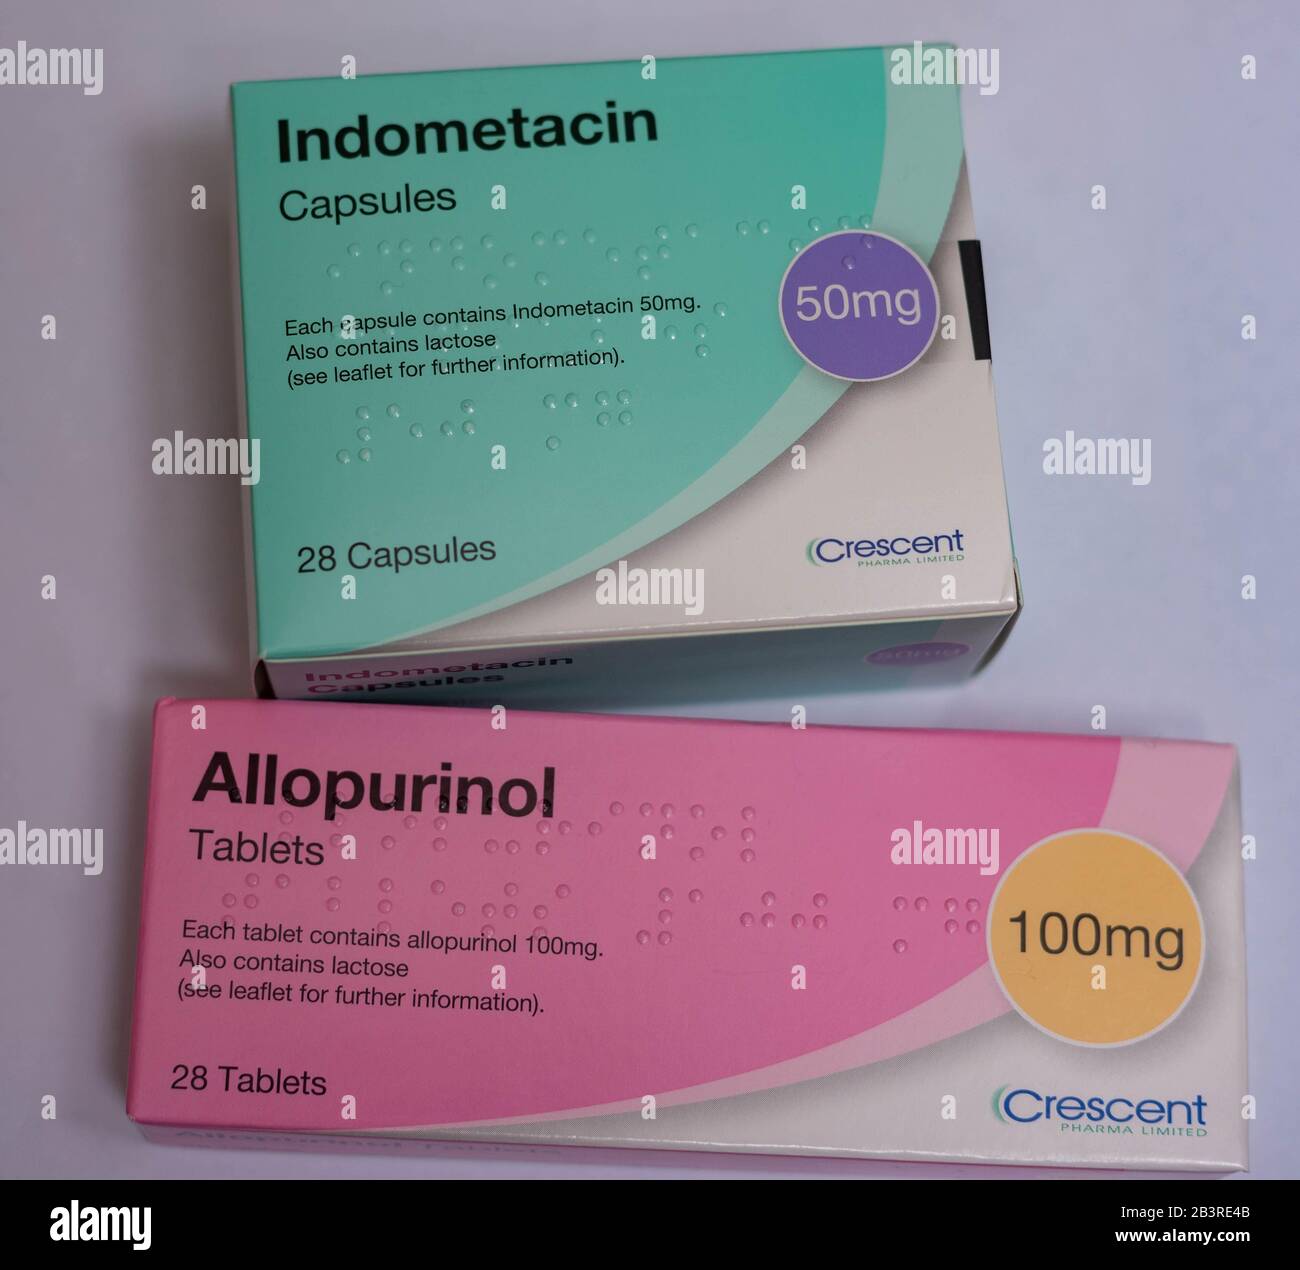 Gout medication: Allopurional to reduce uric acid production and Indometacin a nonsteroidal  anti-inflammatory (NSAID) medication Stock Photo